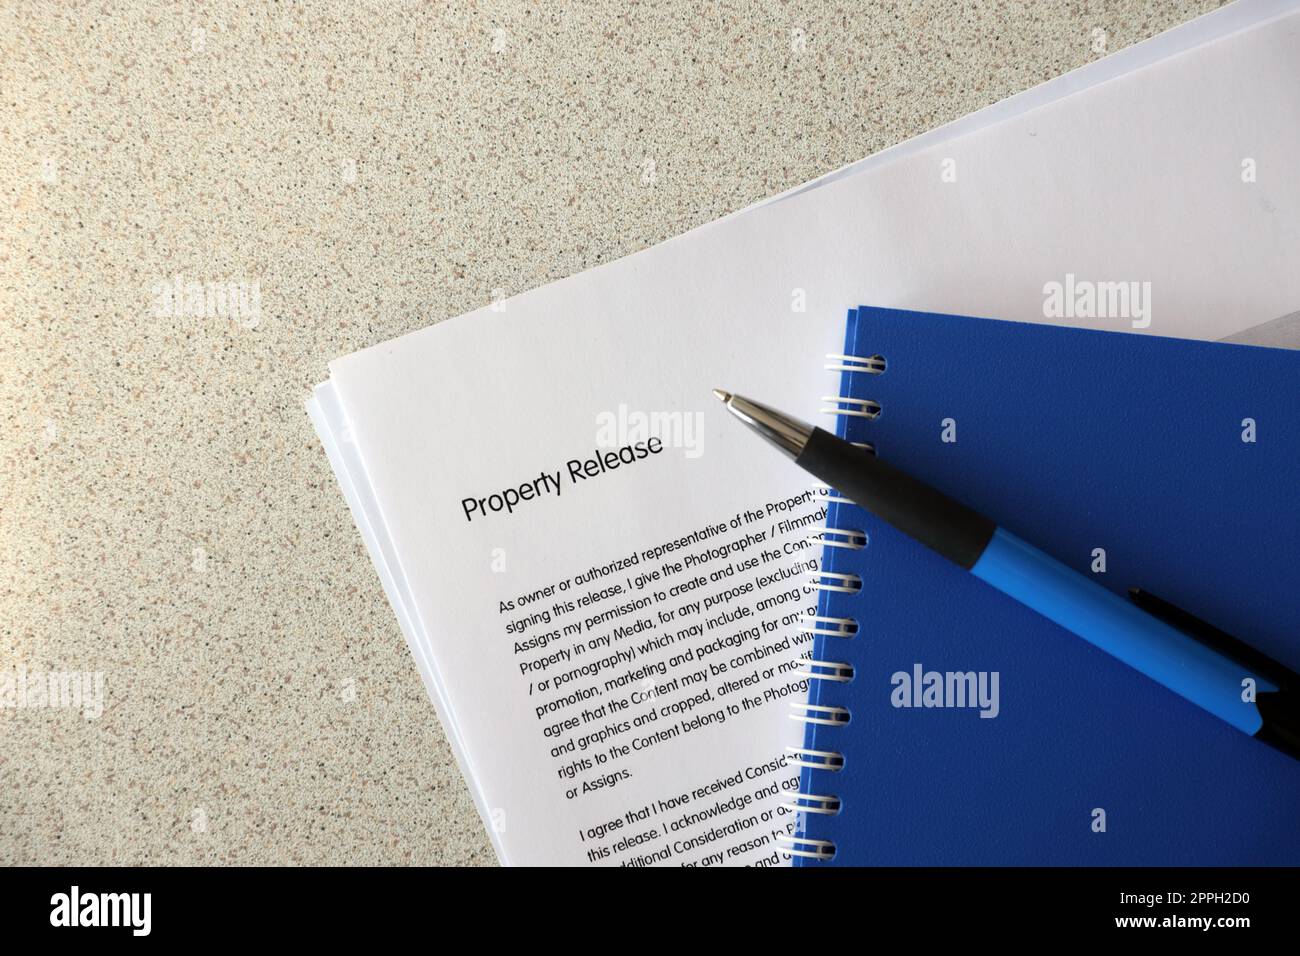 Property release blank form with blue notepad and blue pen lies on photographers table. Property release signing photo Stock Photo